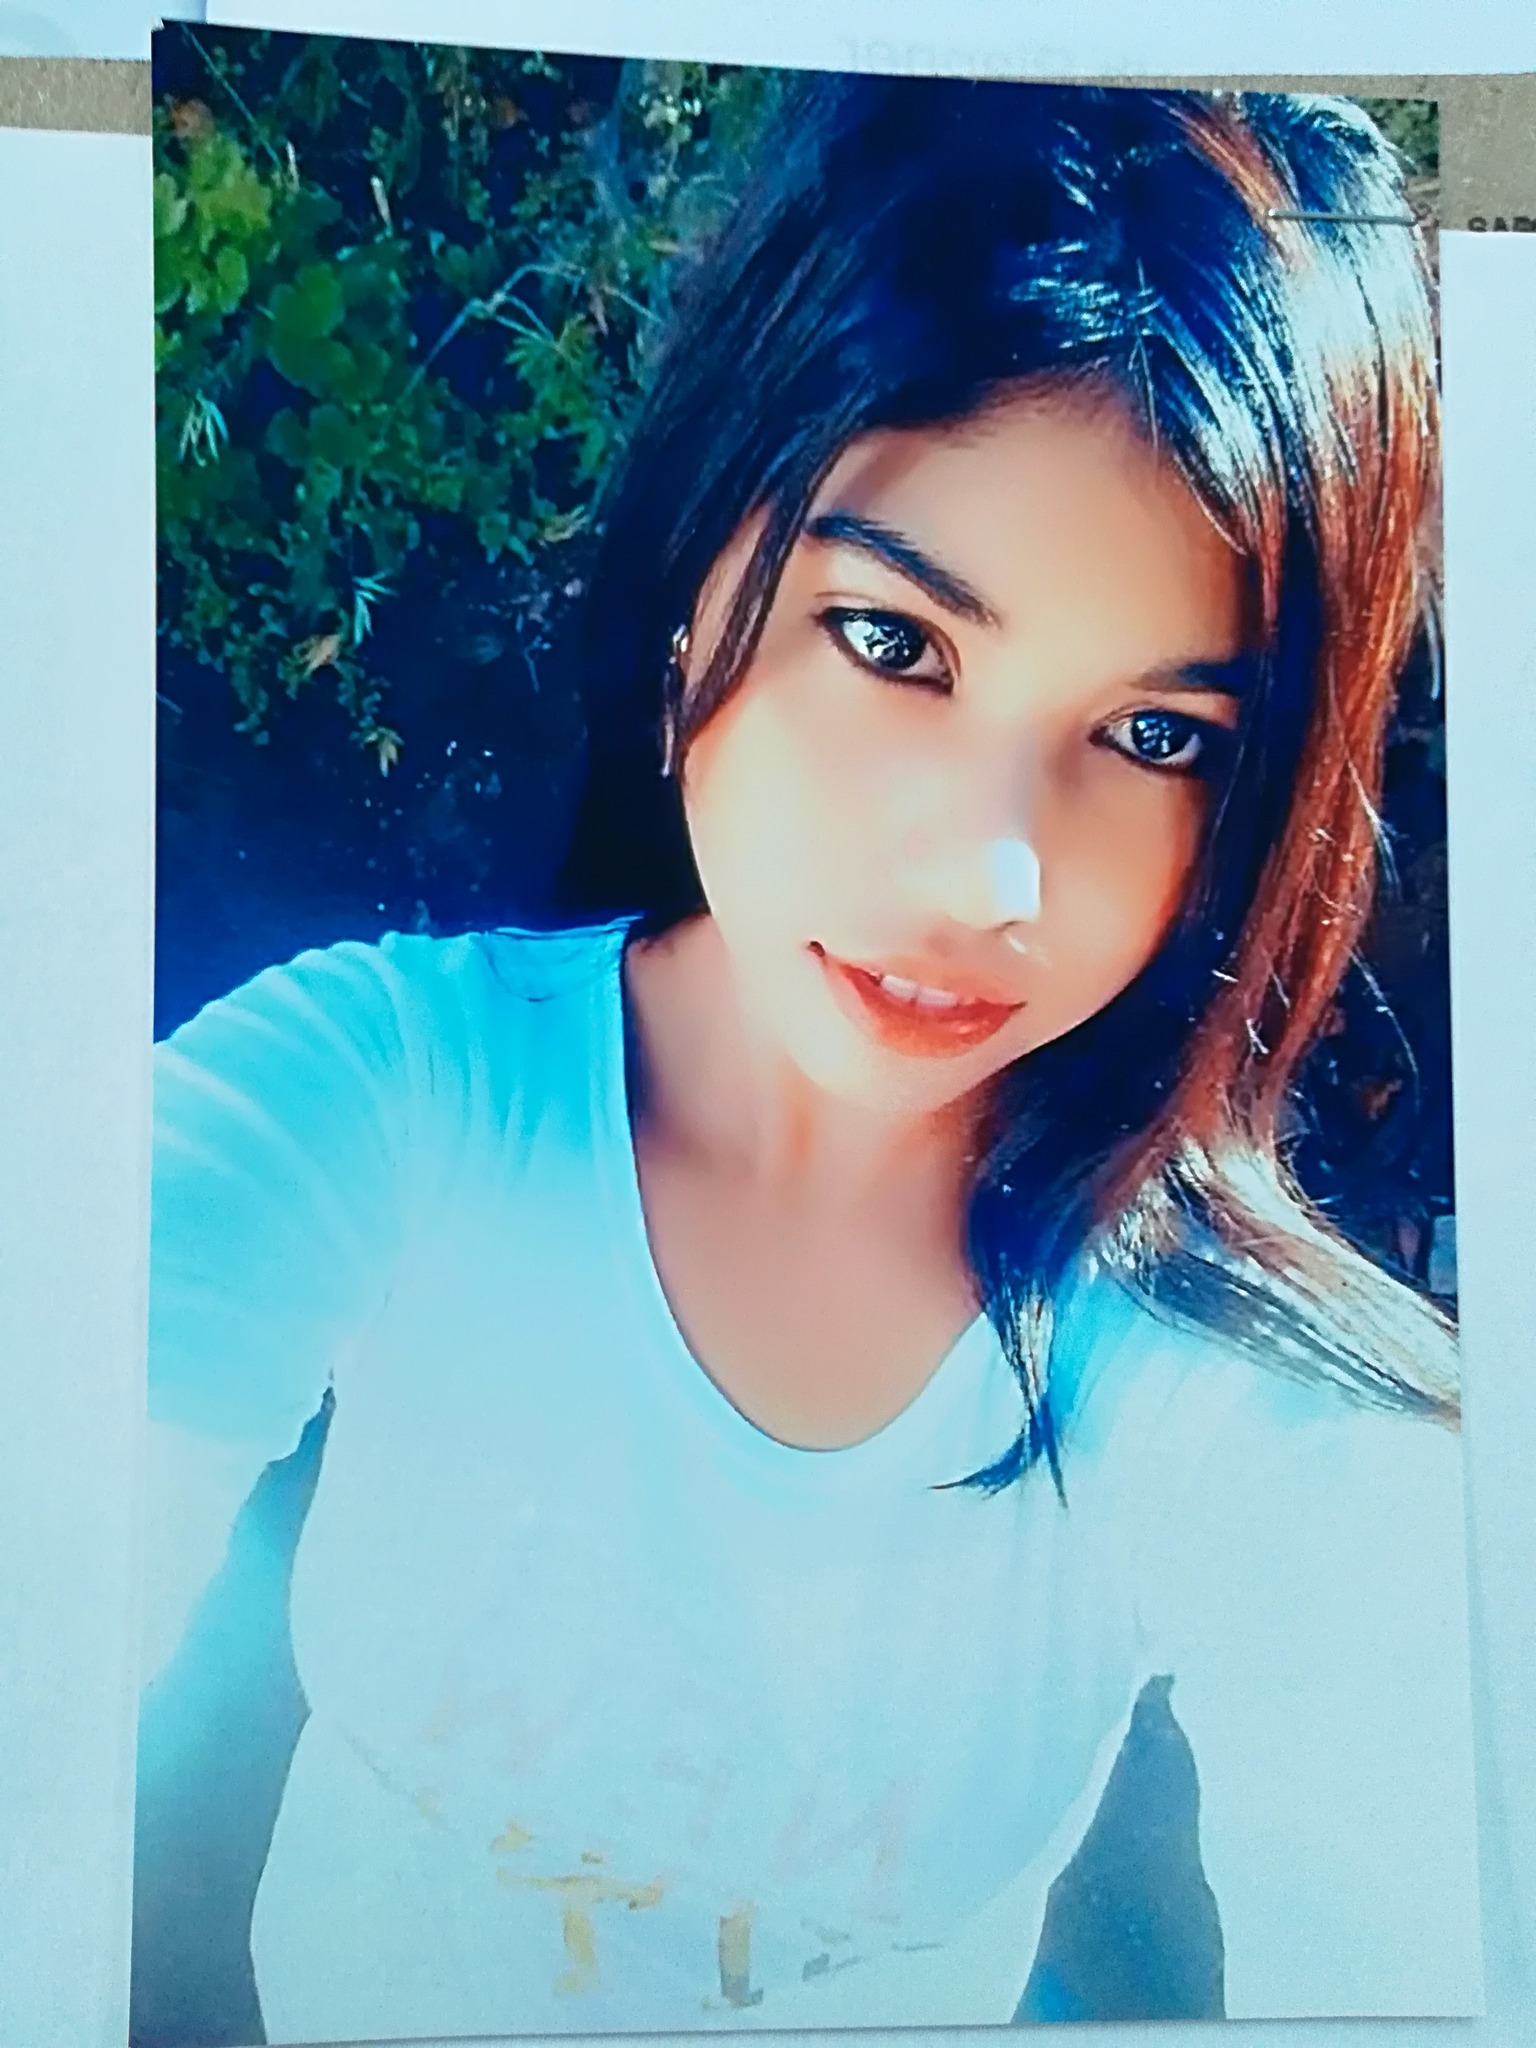 The Chatsworth Family Violence, Child Protection, and Sexual Offences Unit is making an appeal to the members of the community for assistance regarding a missing teenager